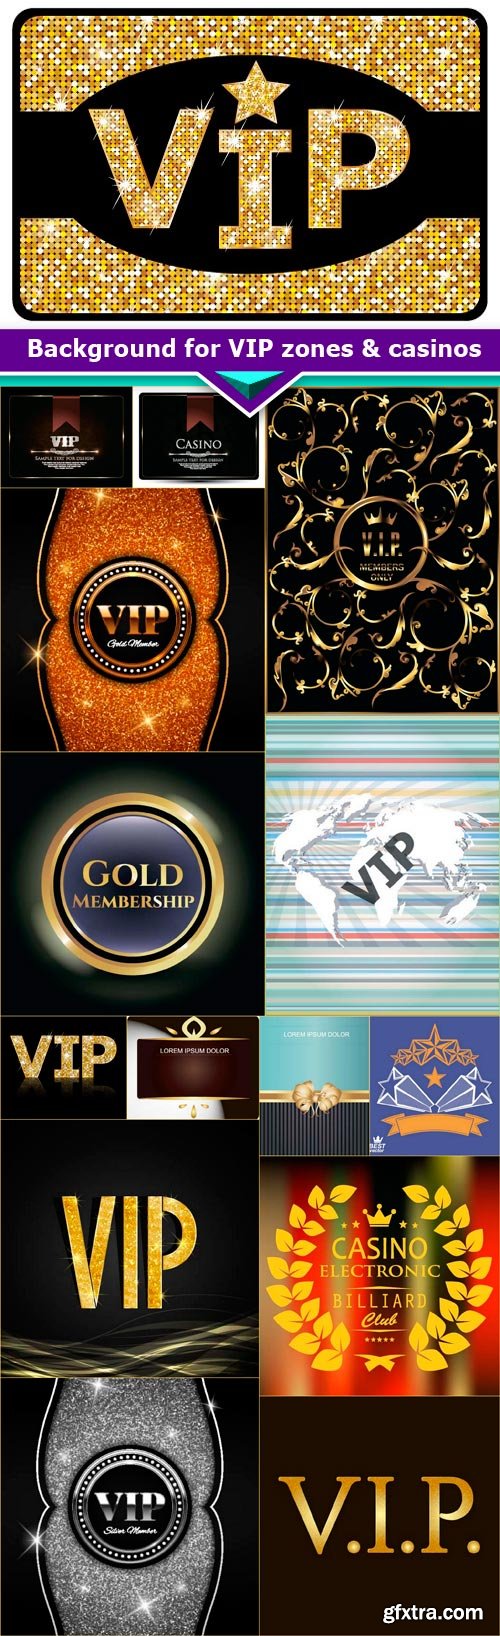 Background for VIP zones & casinos 15x EPS